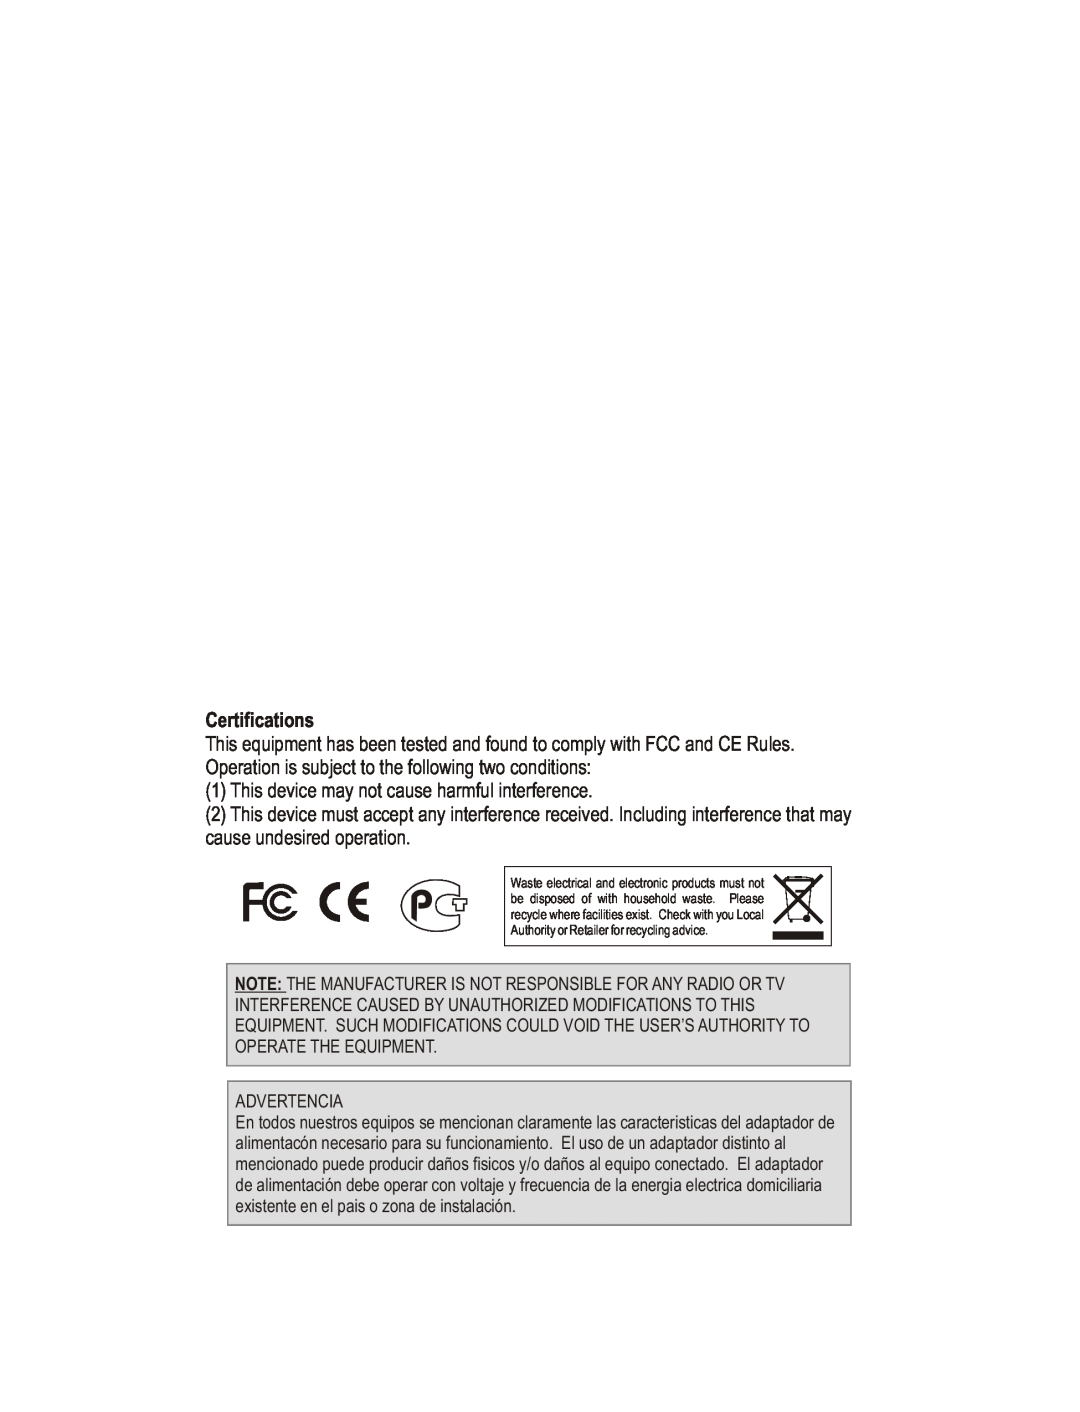 TRENDnet TDM-E400 manual Certifications, This device may not cause harmful interference 